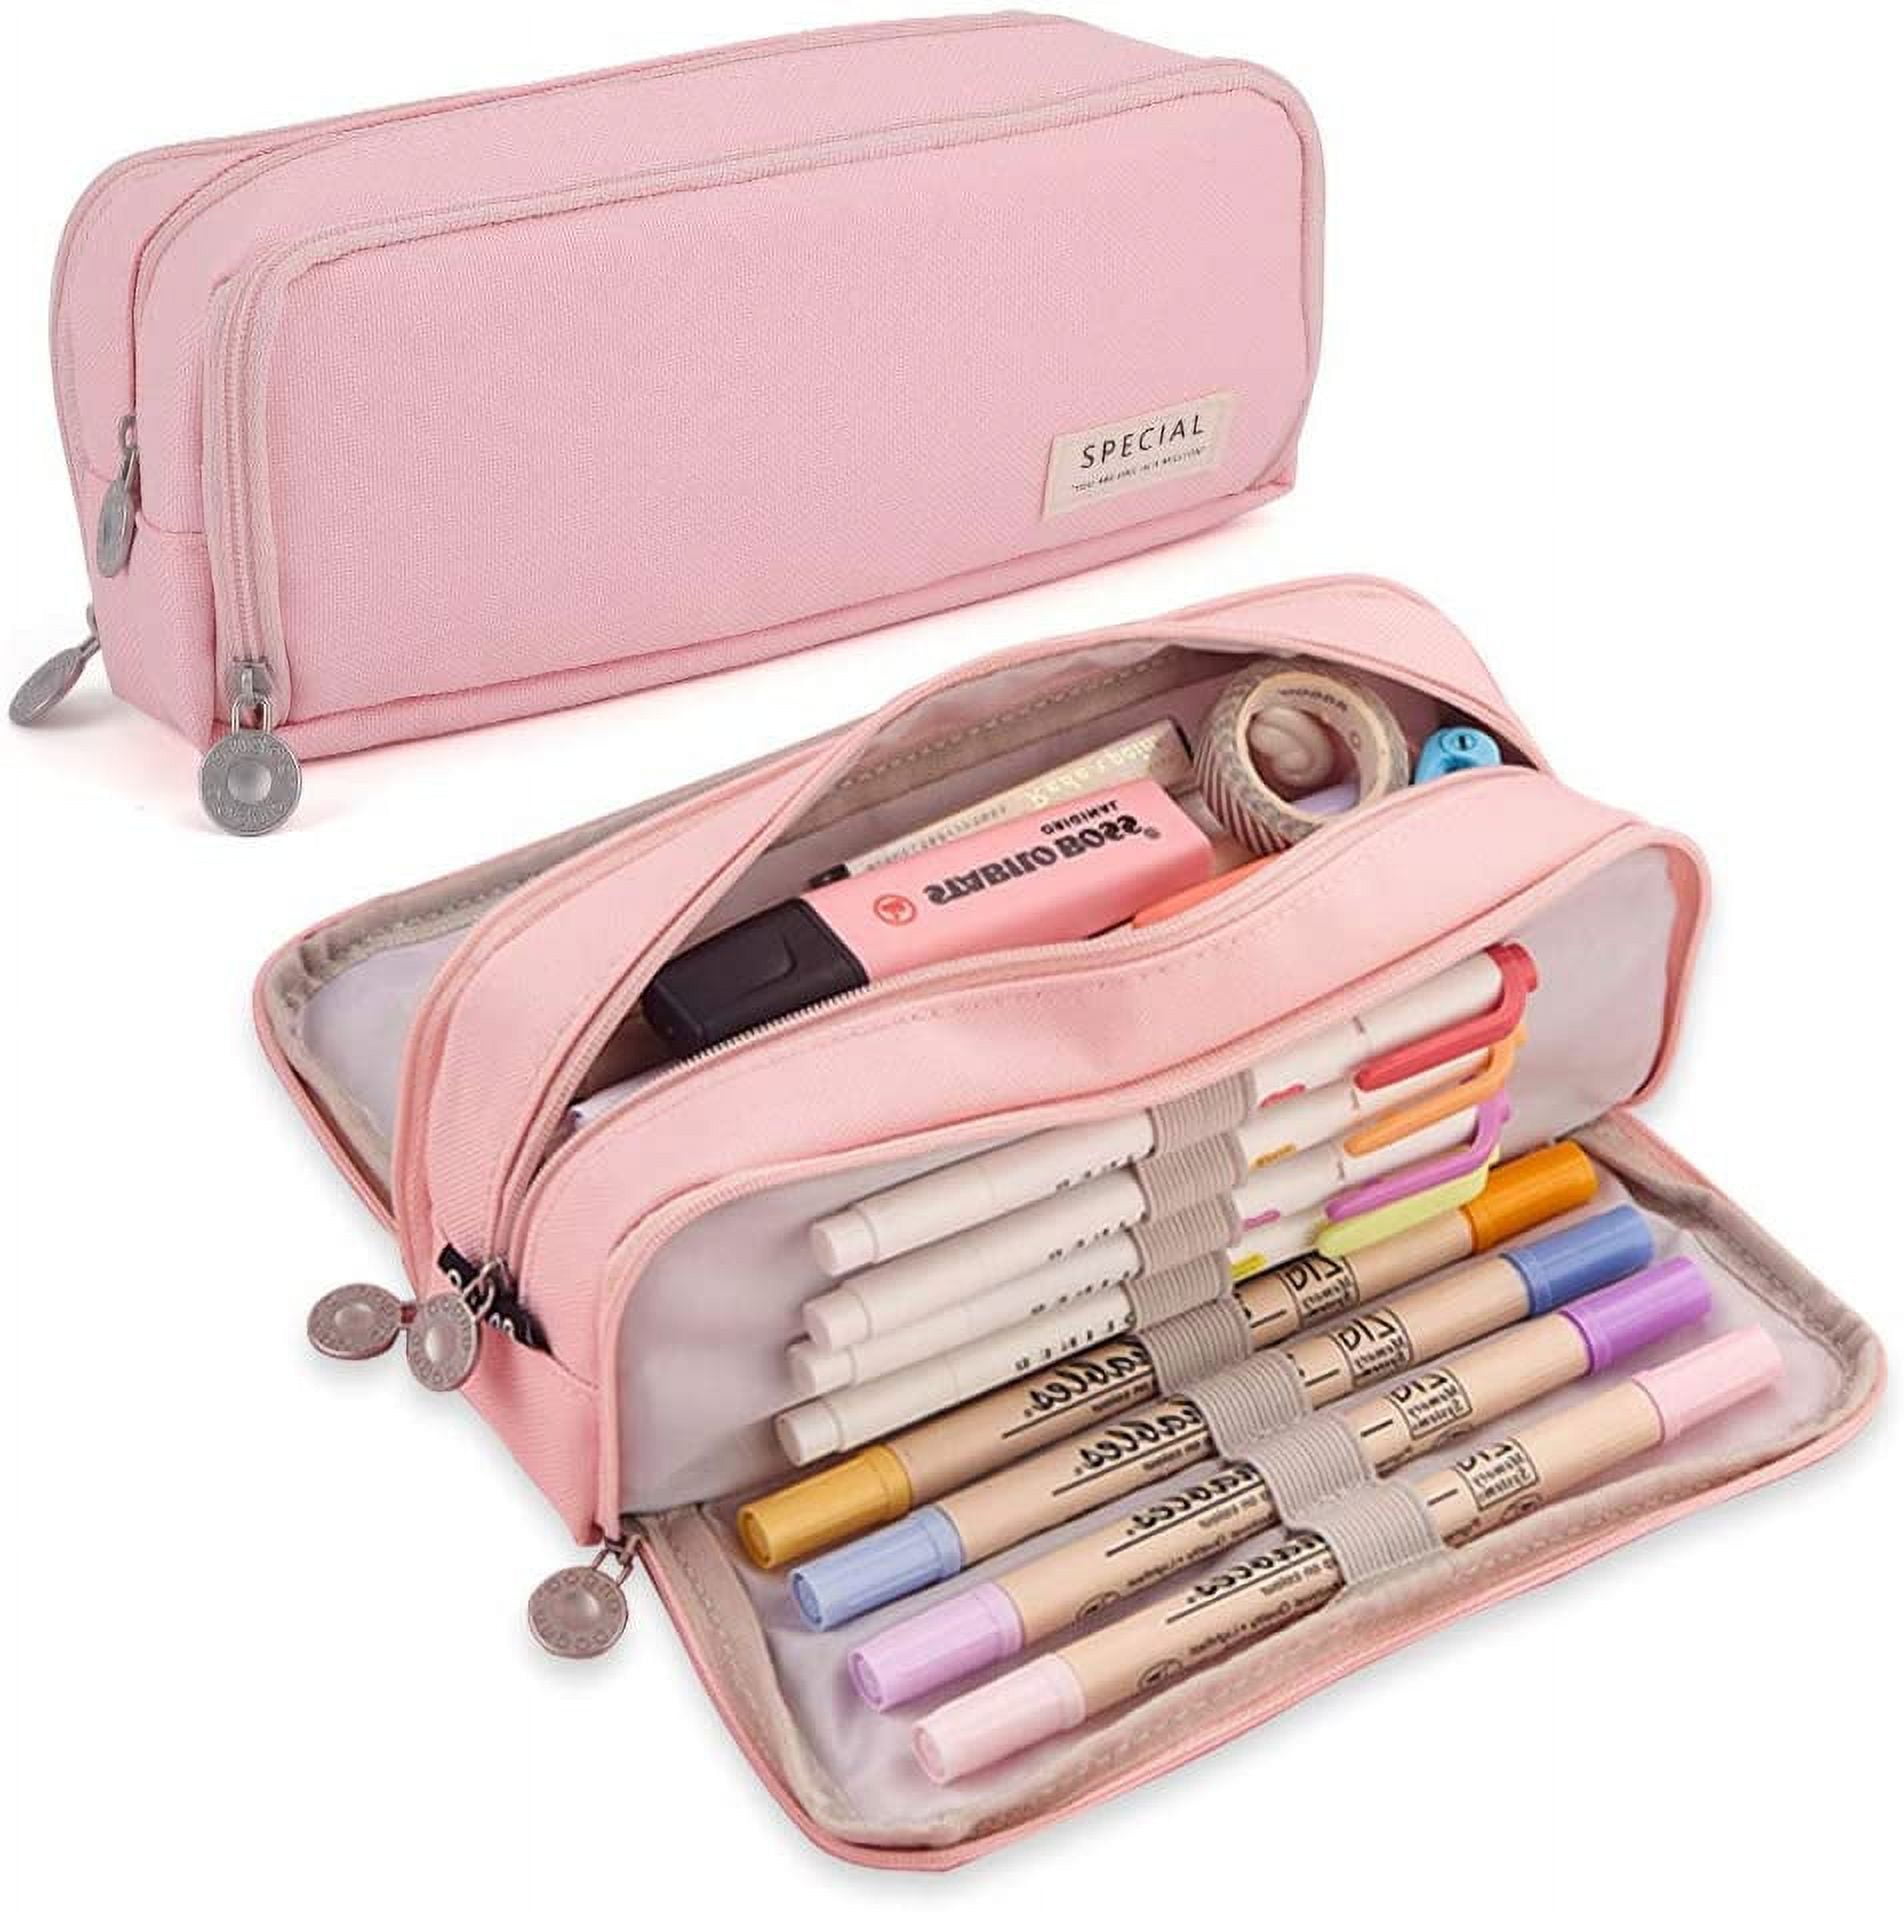  Teackbd Pink Pencil Case Pouch Bag,Large Capacity Pencil Case  with Handle,Pencil Case Aesthetic,Pencil Boxs for Kids Girls Boys Adults  Suitable for Office, School and Family Use : Office Products